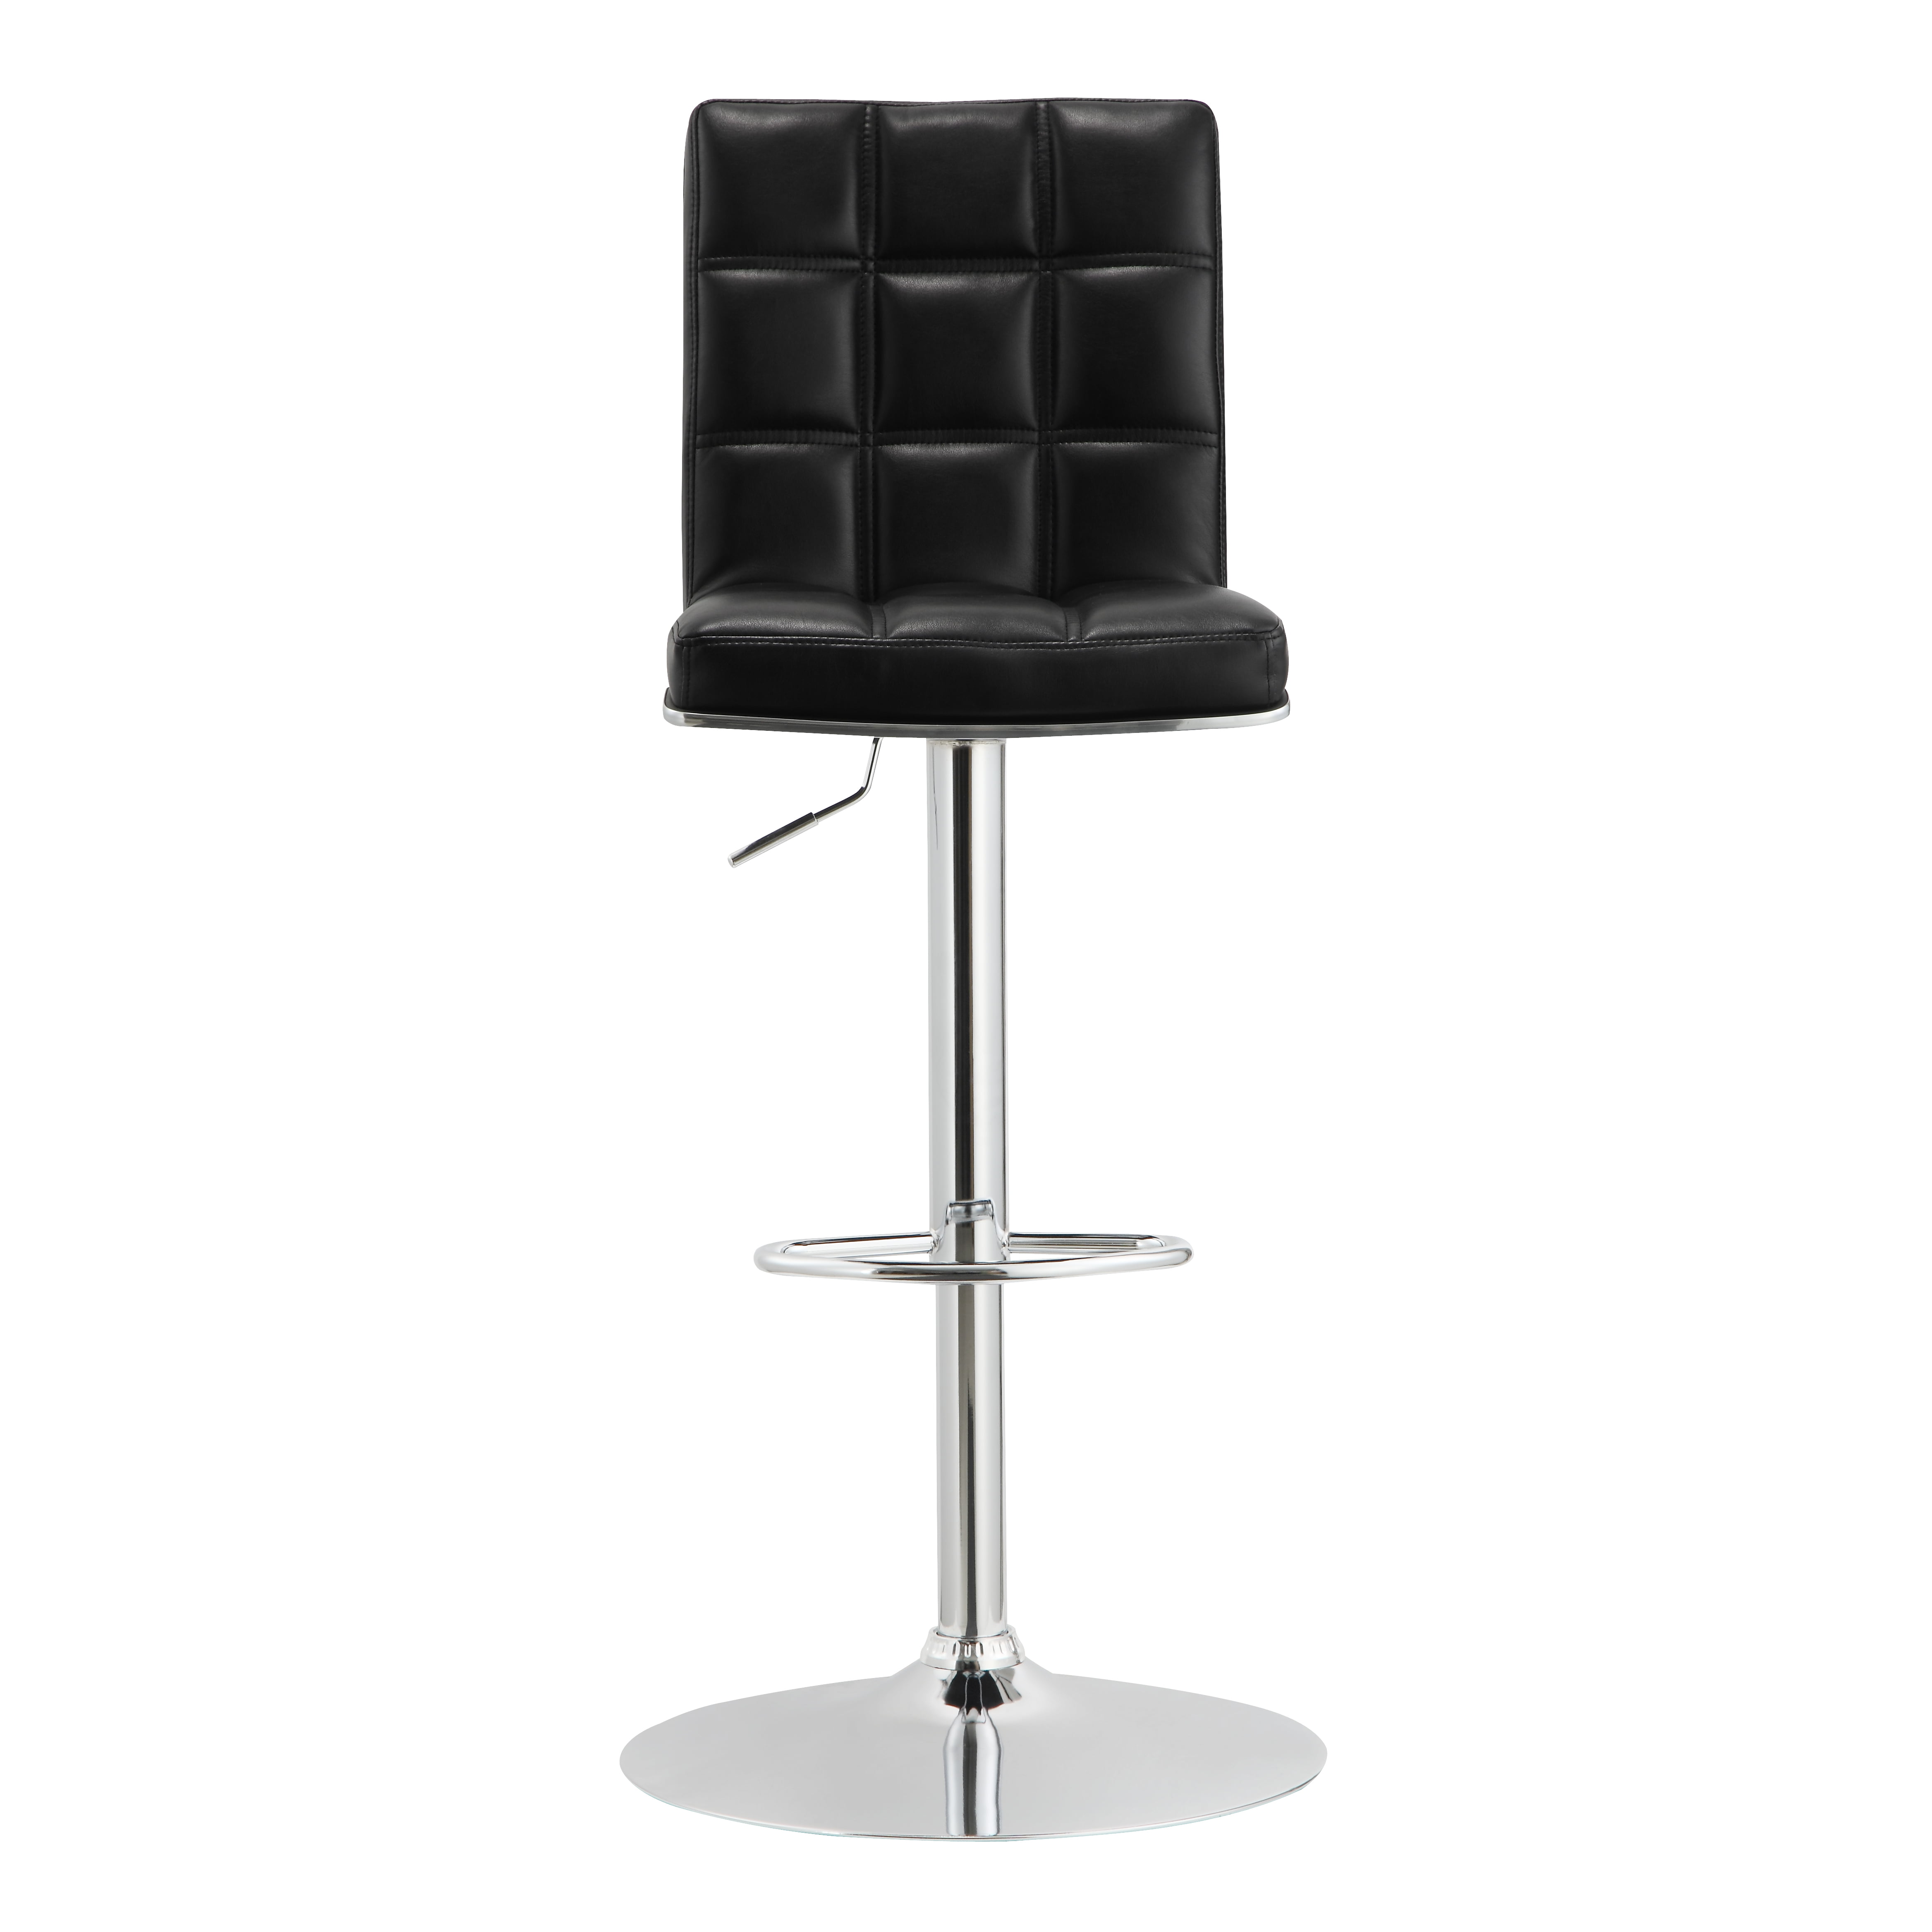 HomeFare Quilted Back Faux Leather Gas Lift Barstool Black - Walmart.com